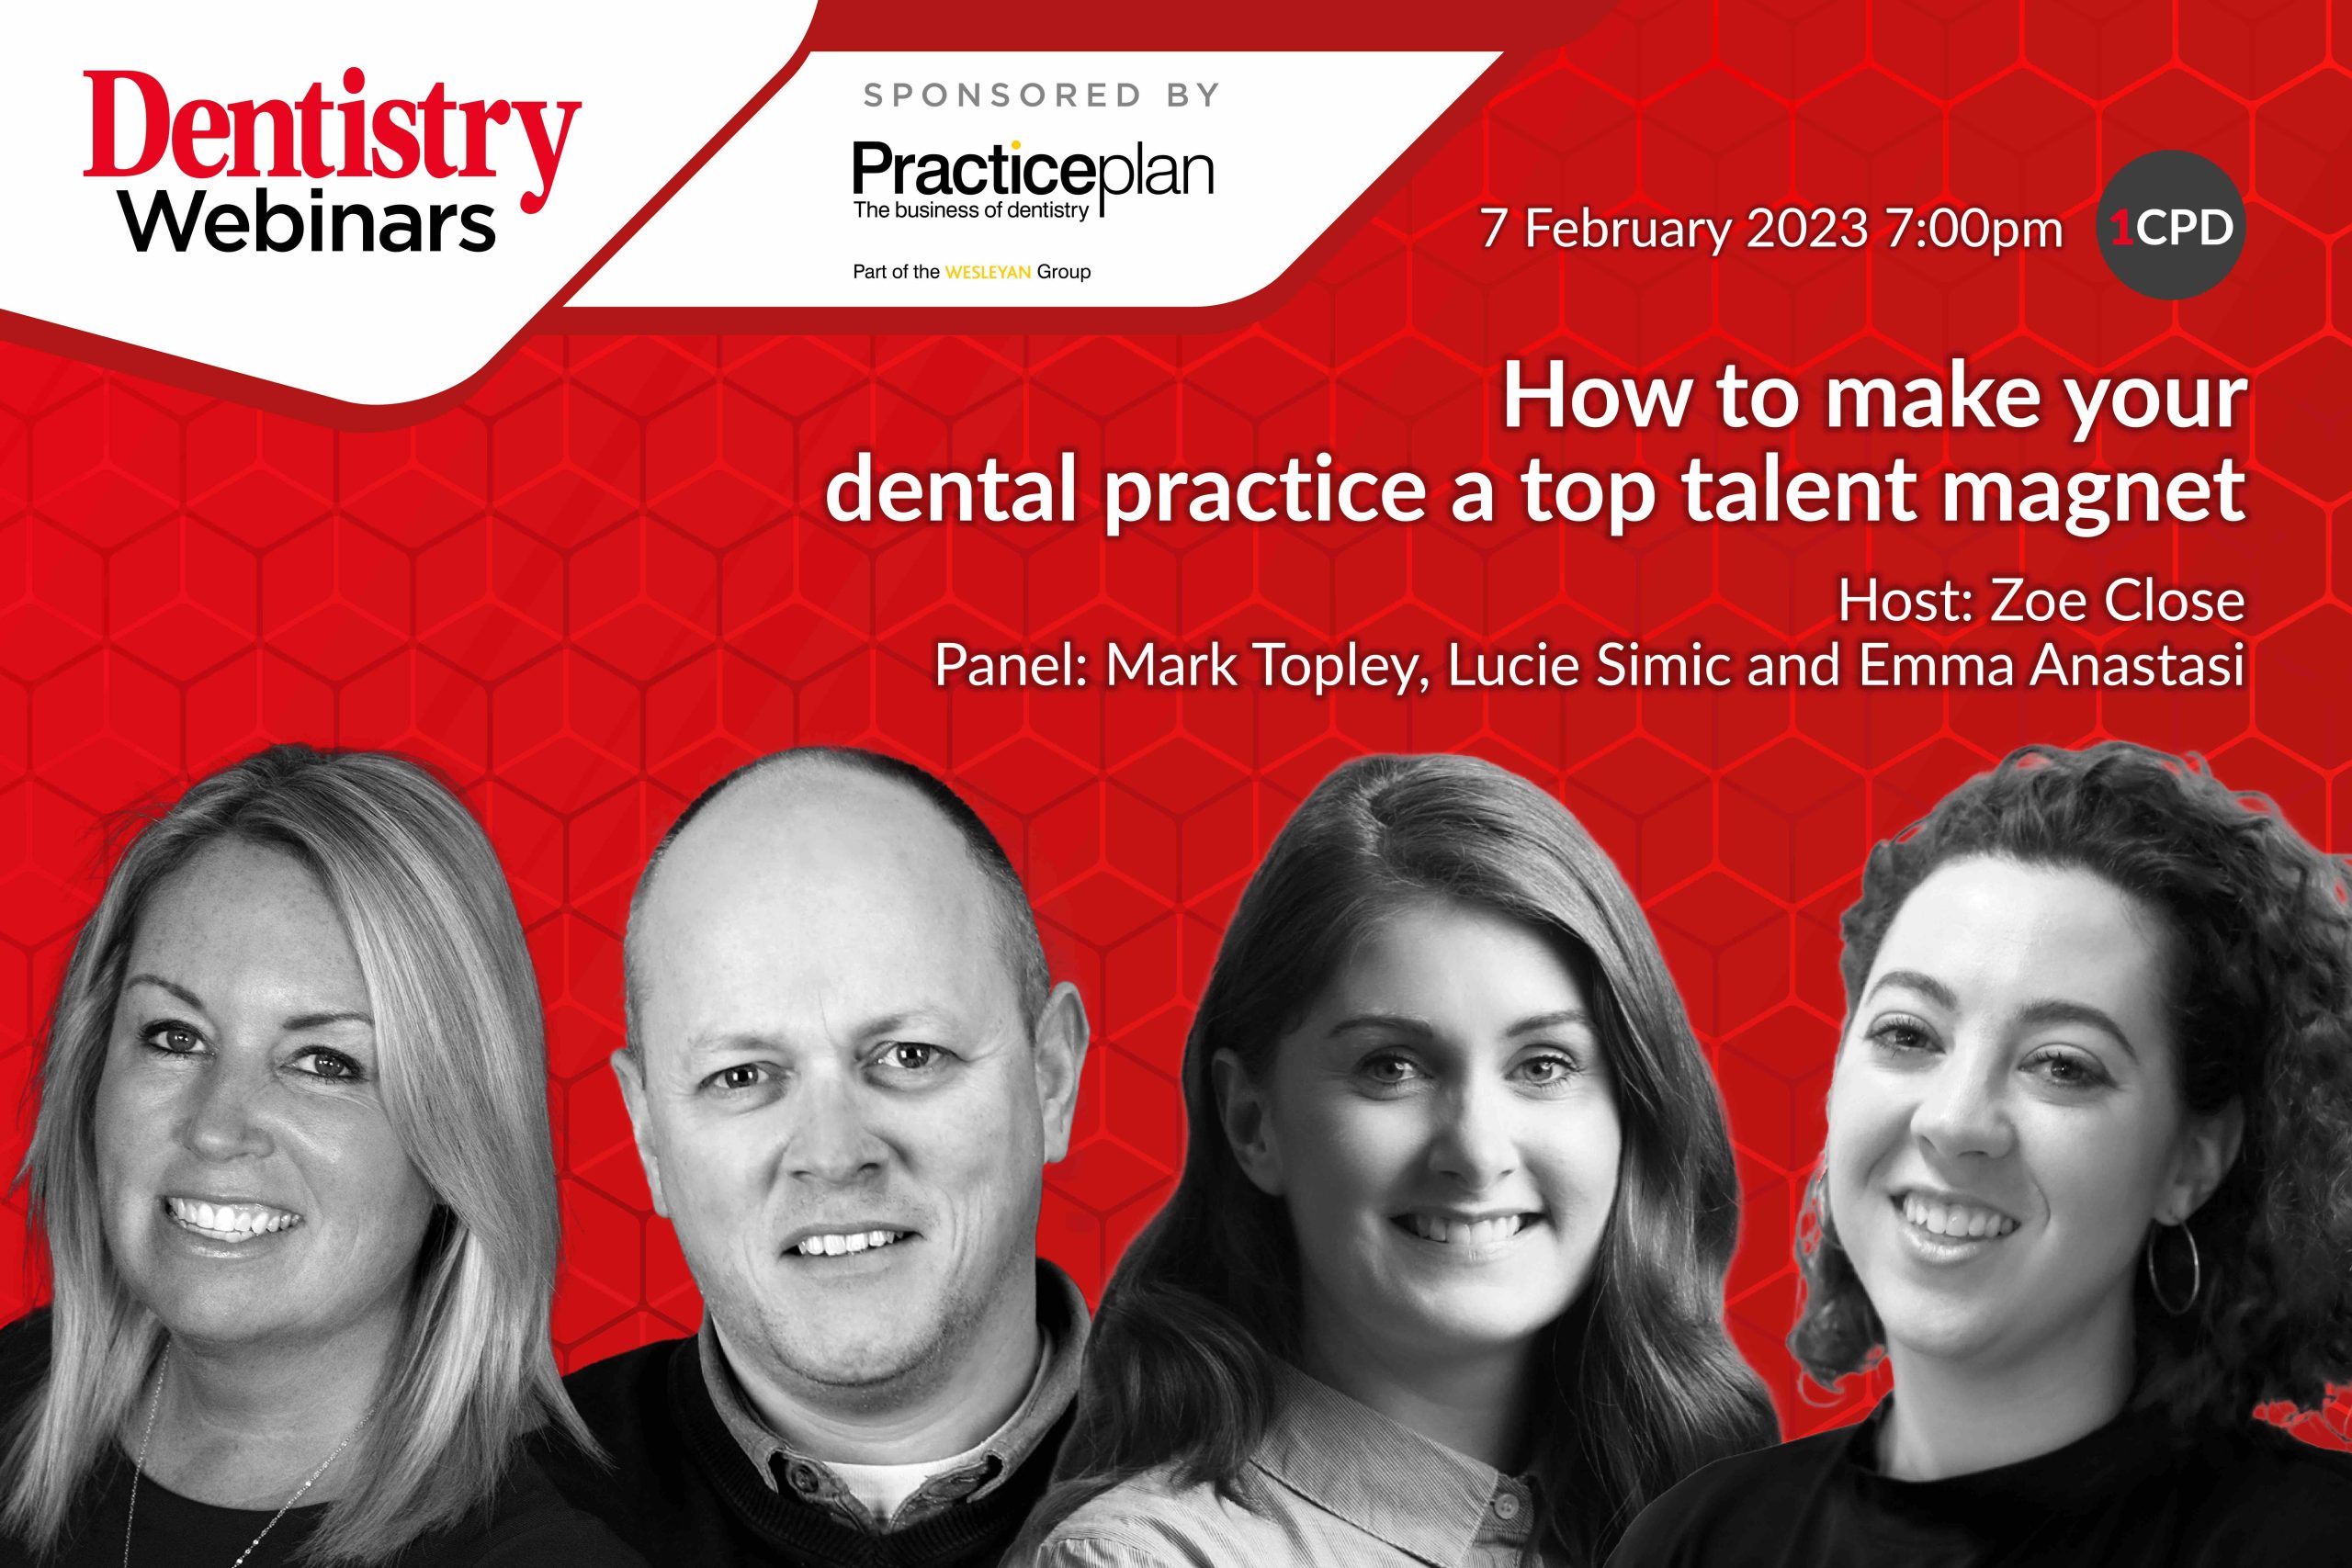 Join Zoe Close on Tuesday 7 February 2023 at 7pm as she discusses how to make your dental practice a top talent magnet with her panel.